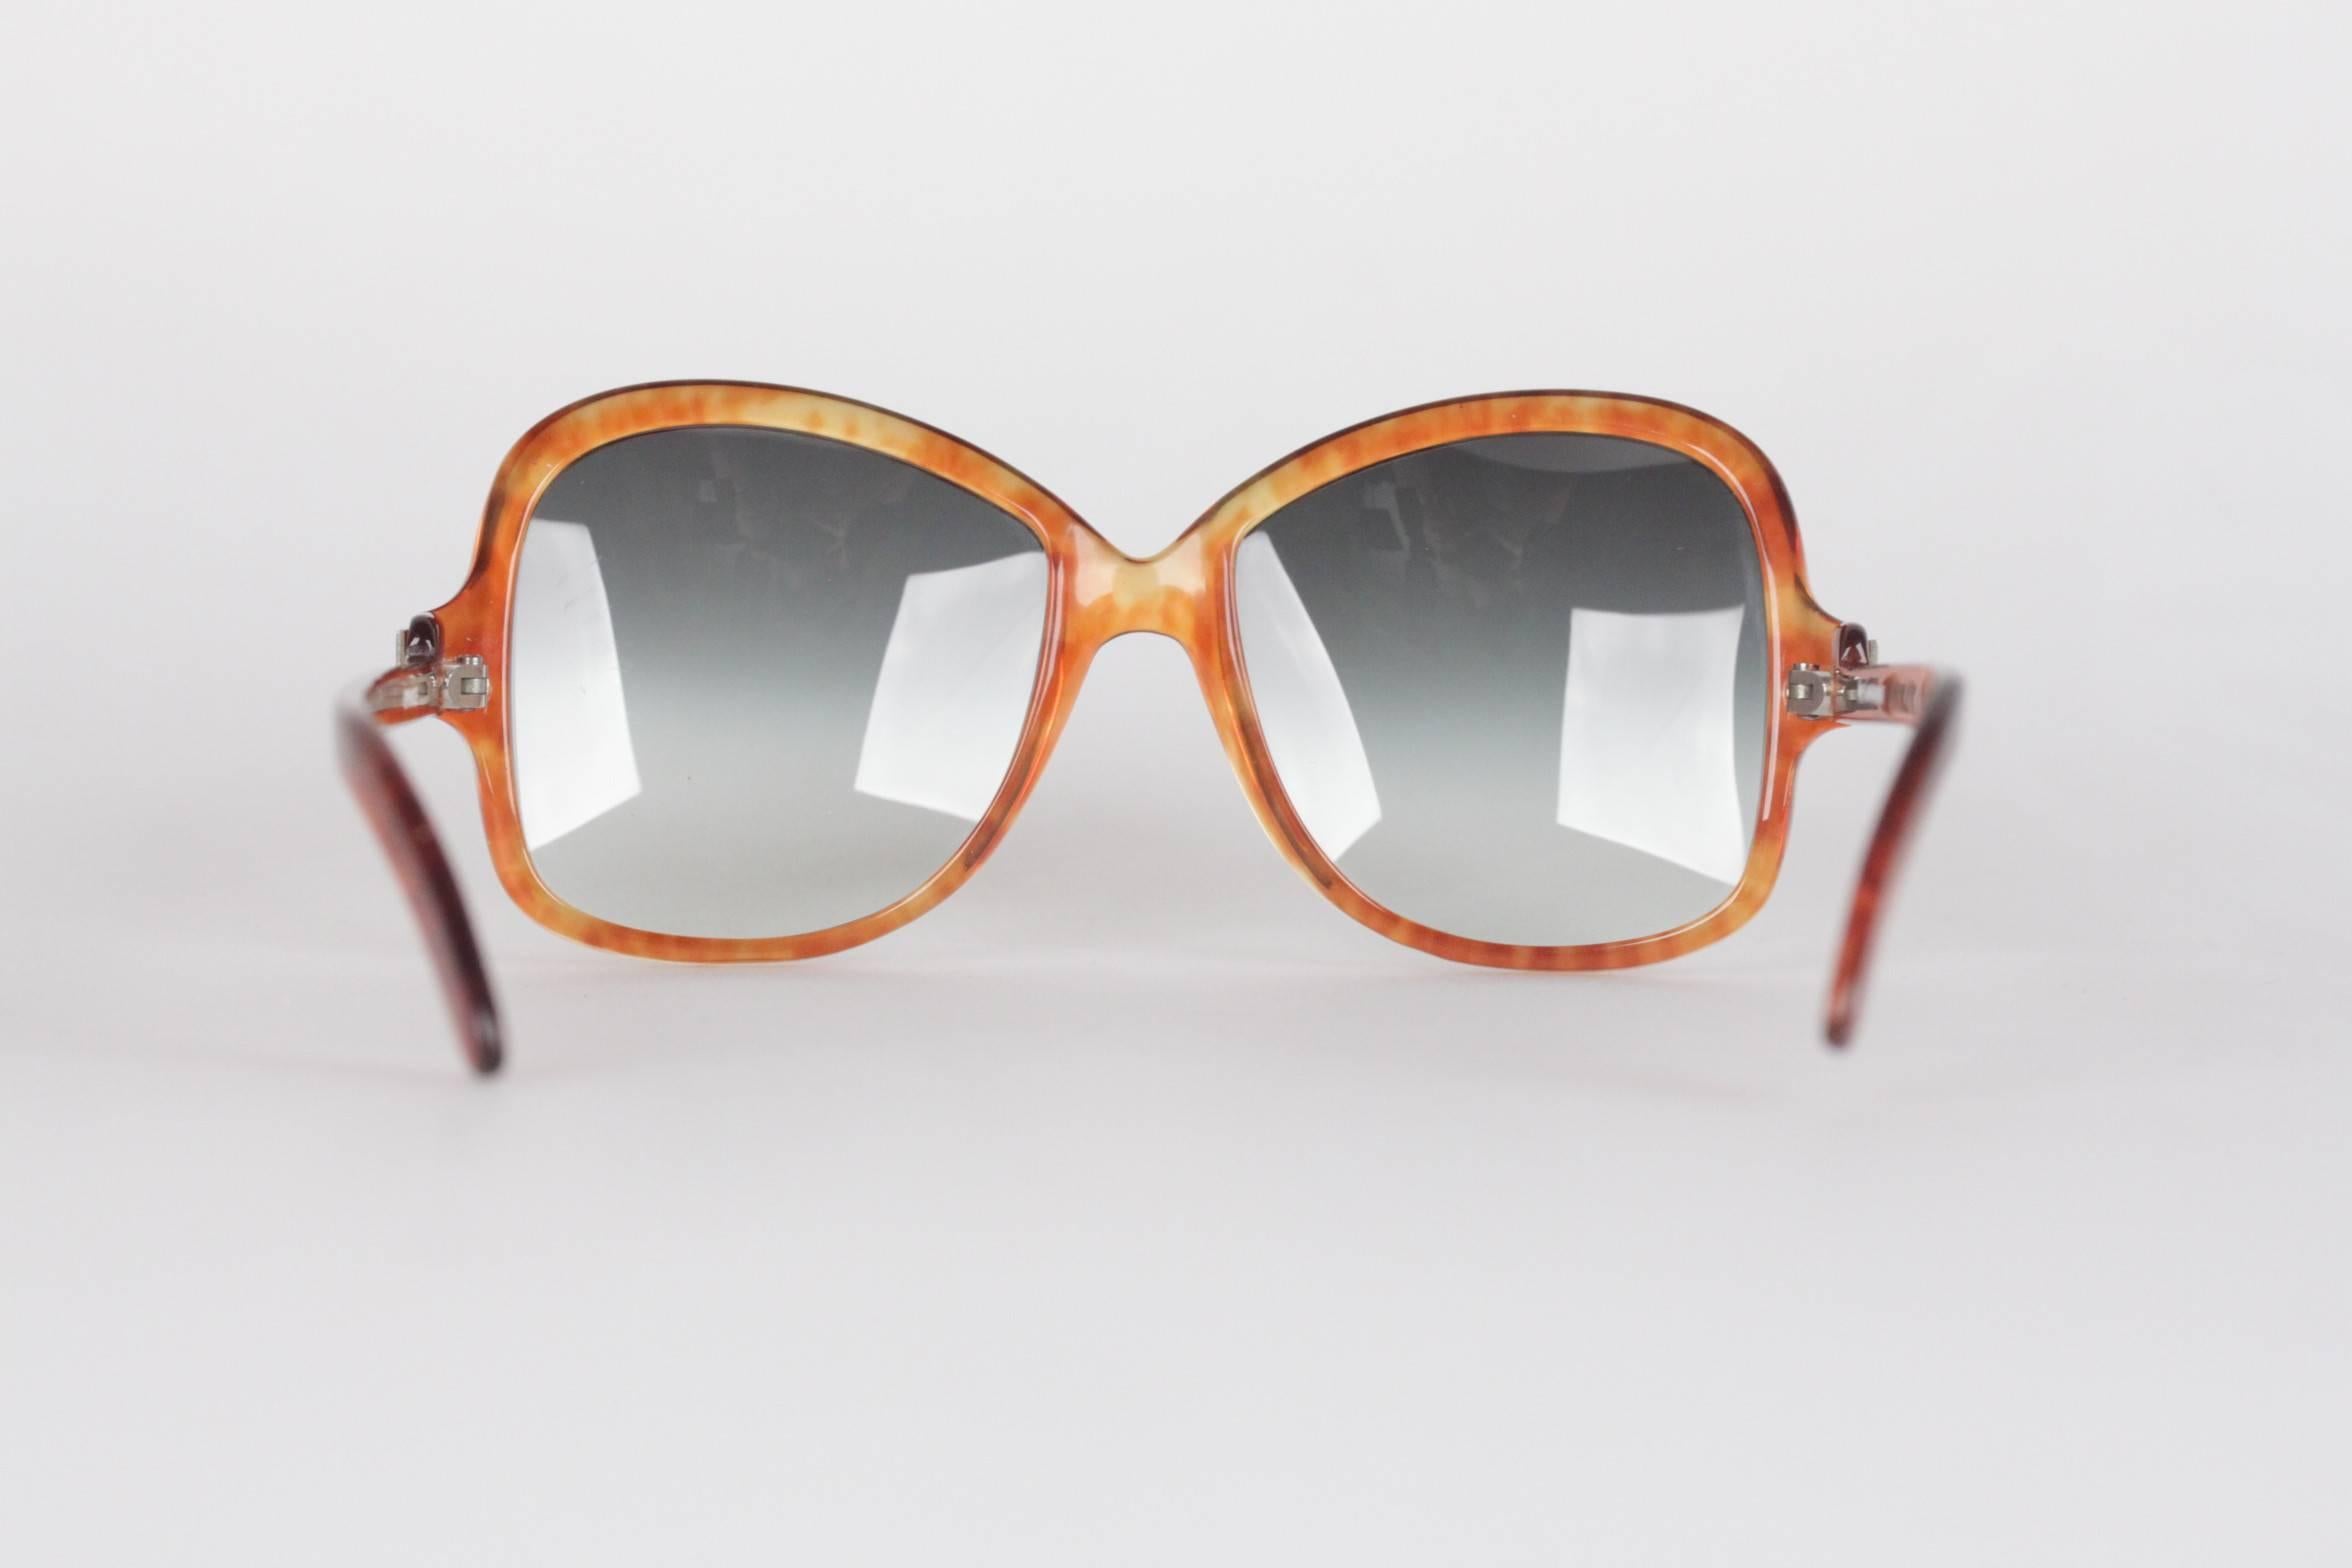 - Vintage YVES SAINT LAURENT sunglasses, Made in France

- mod: OPONCE - 797

- Light brown (tortoise effect) semi transparent beautiful oversized frame, with reddish/brown semi trasparent arms

- Green/Turquoise MINT 100% UV GRADIENT